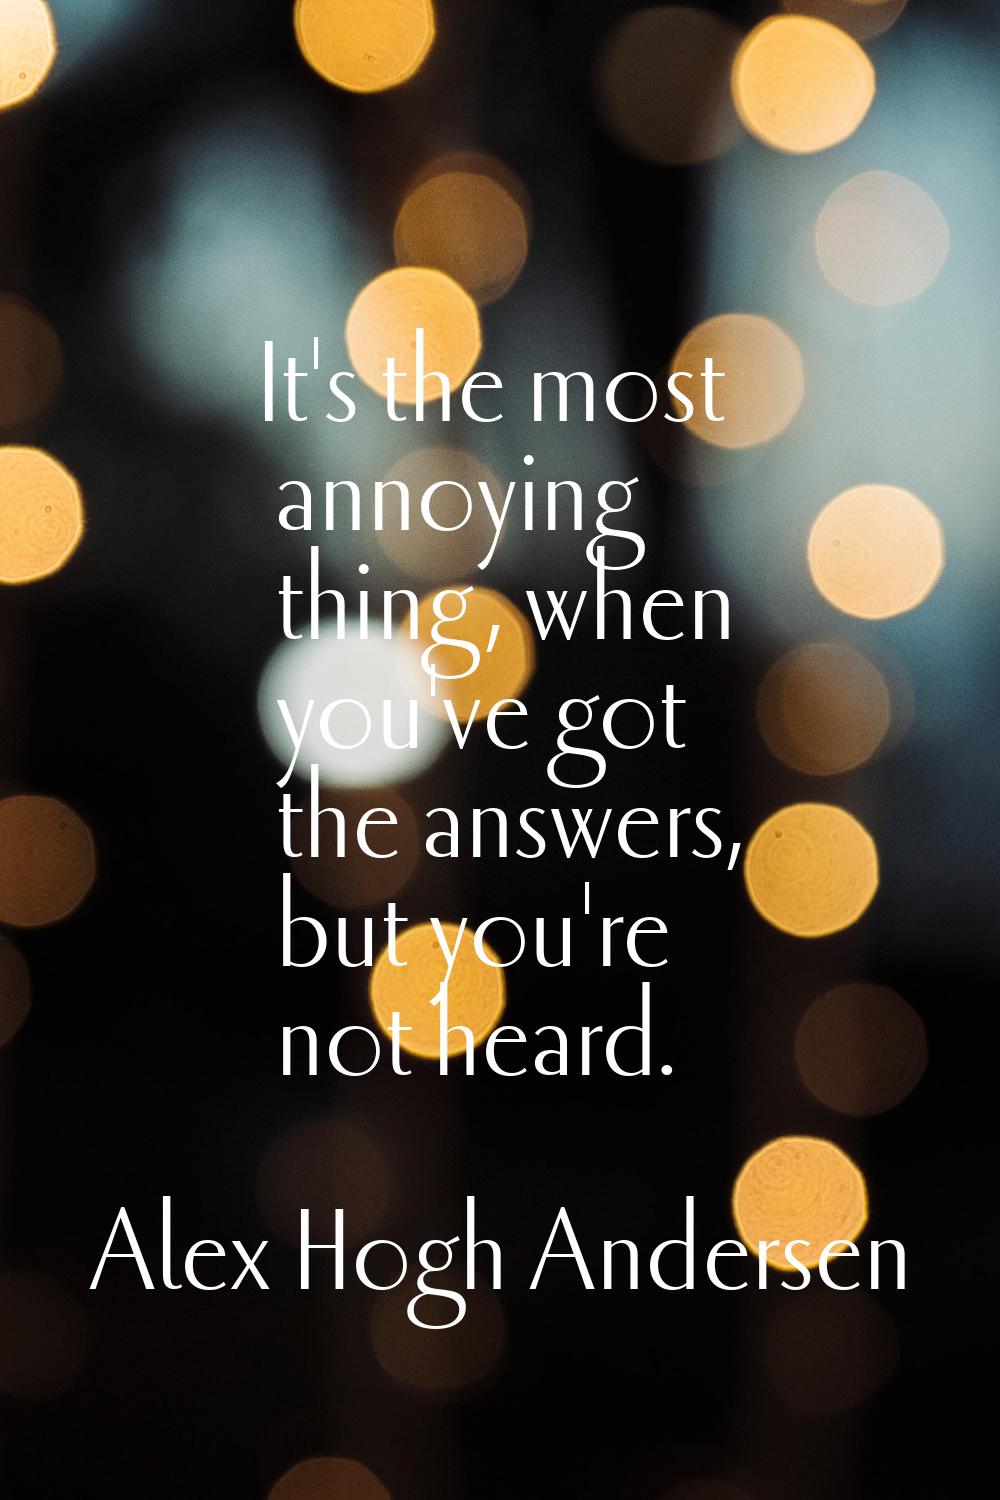 It's the most annoying thing, when you've got the answers, but you're not heard.